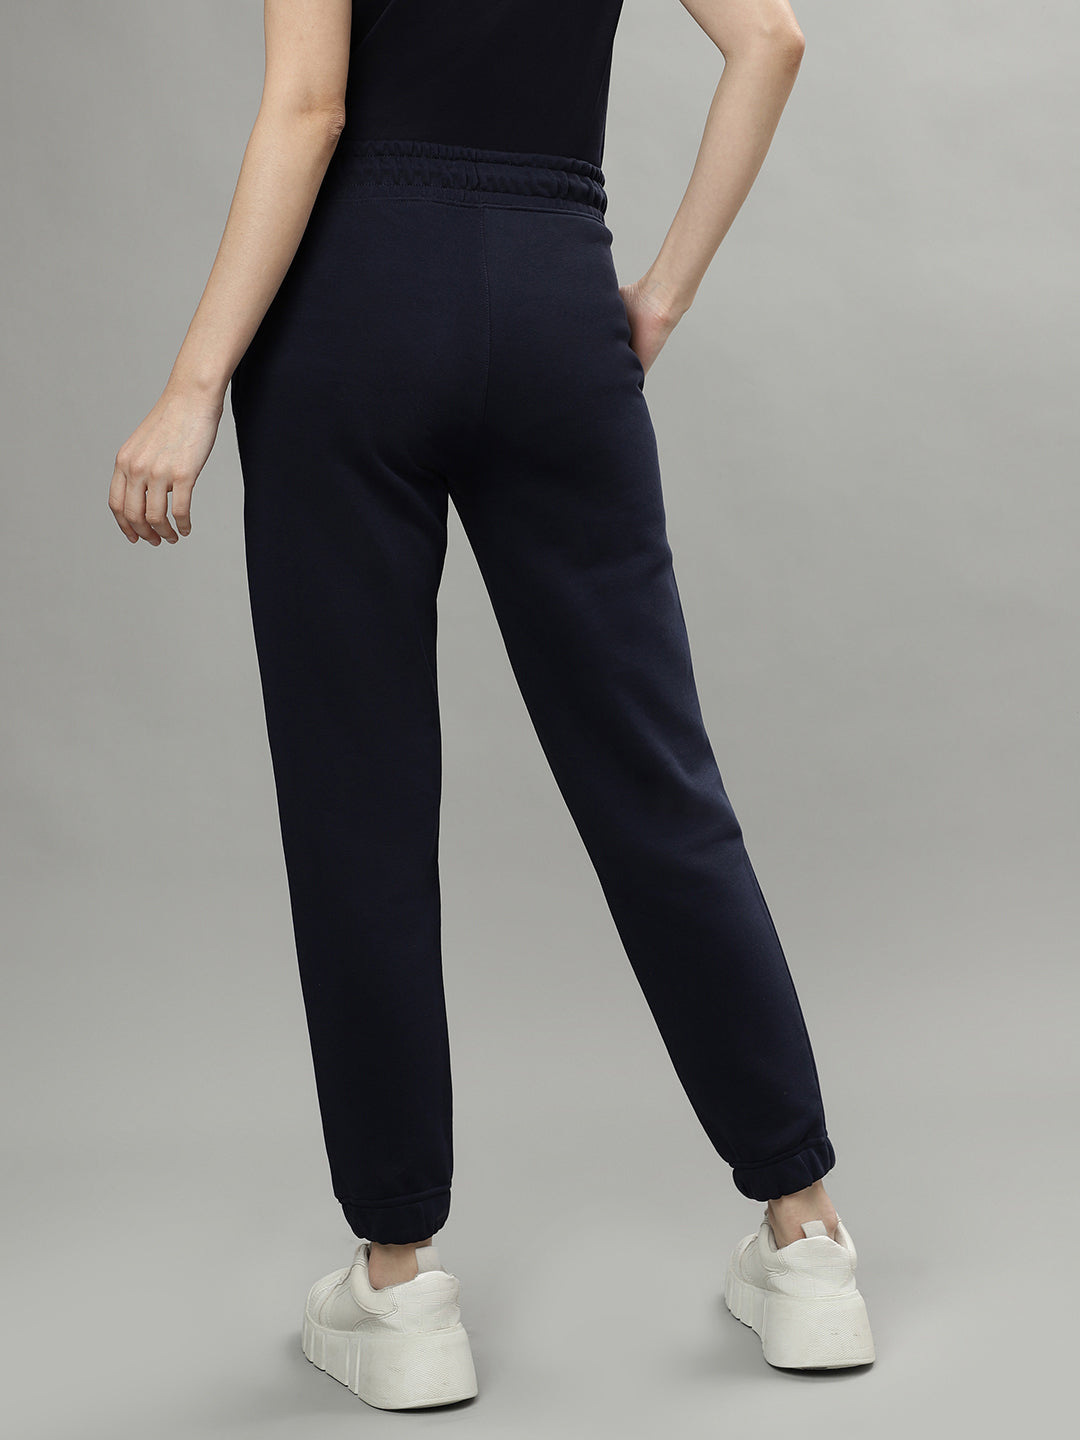 FULLSOFT Sweatpants for Women-Womens Joggers with India